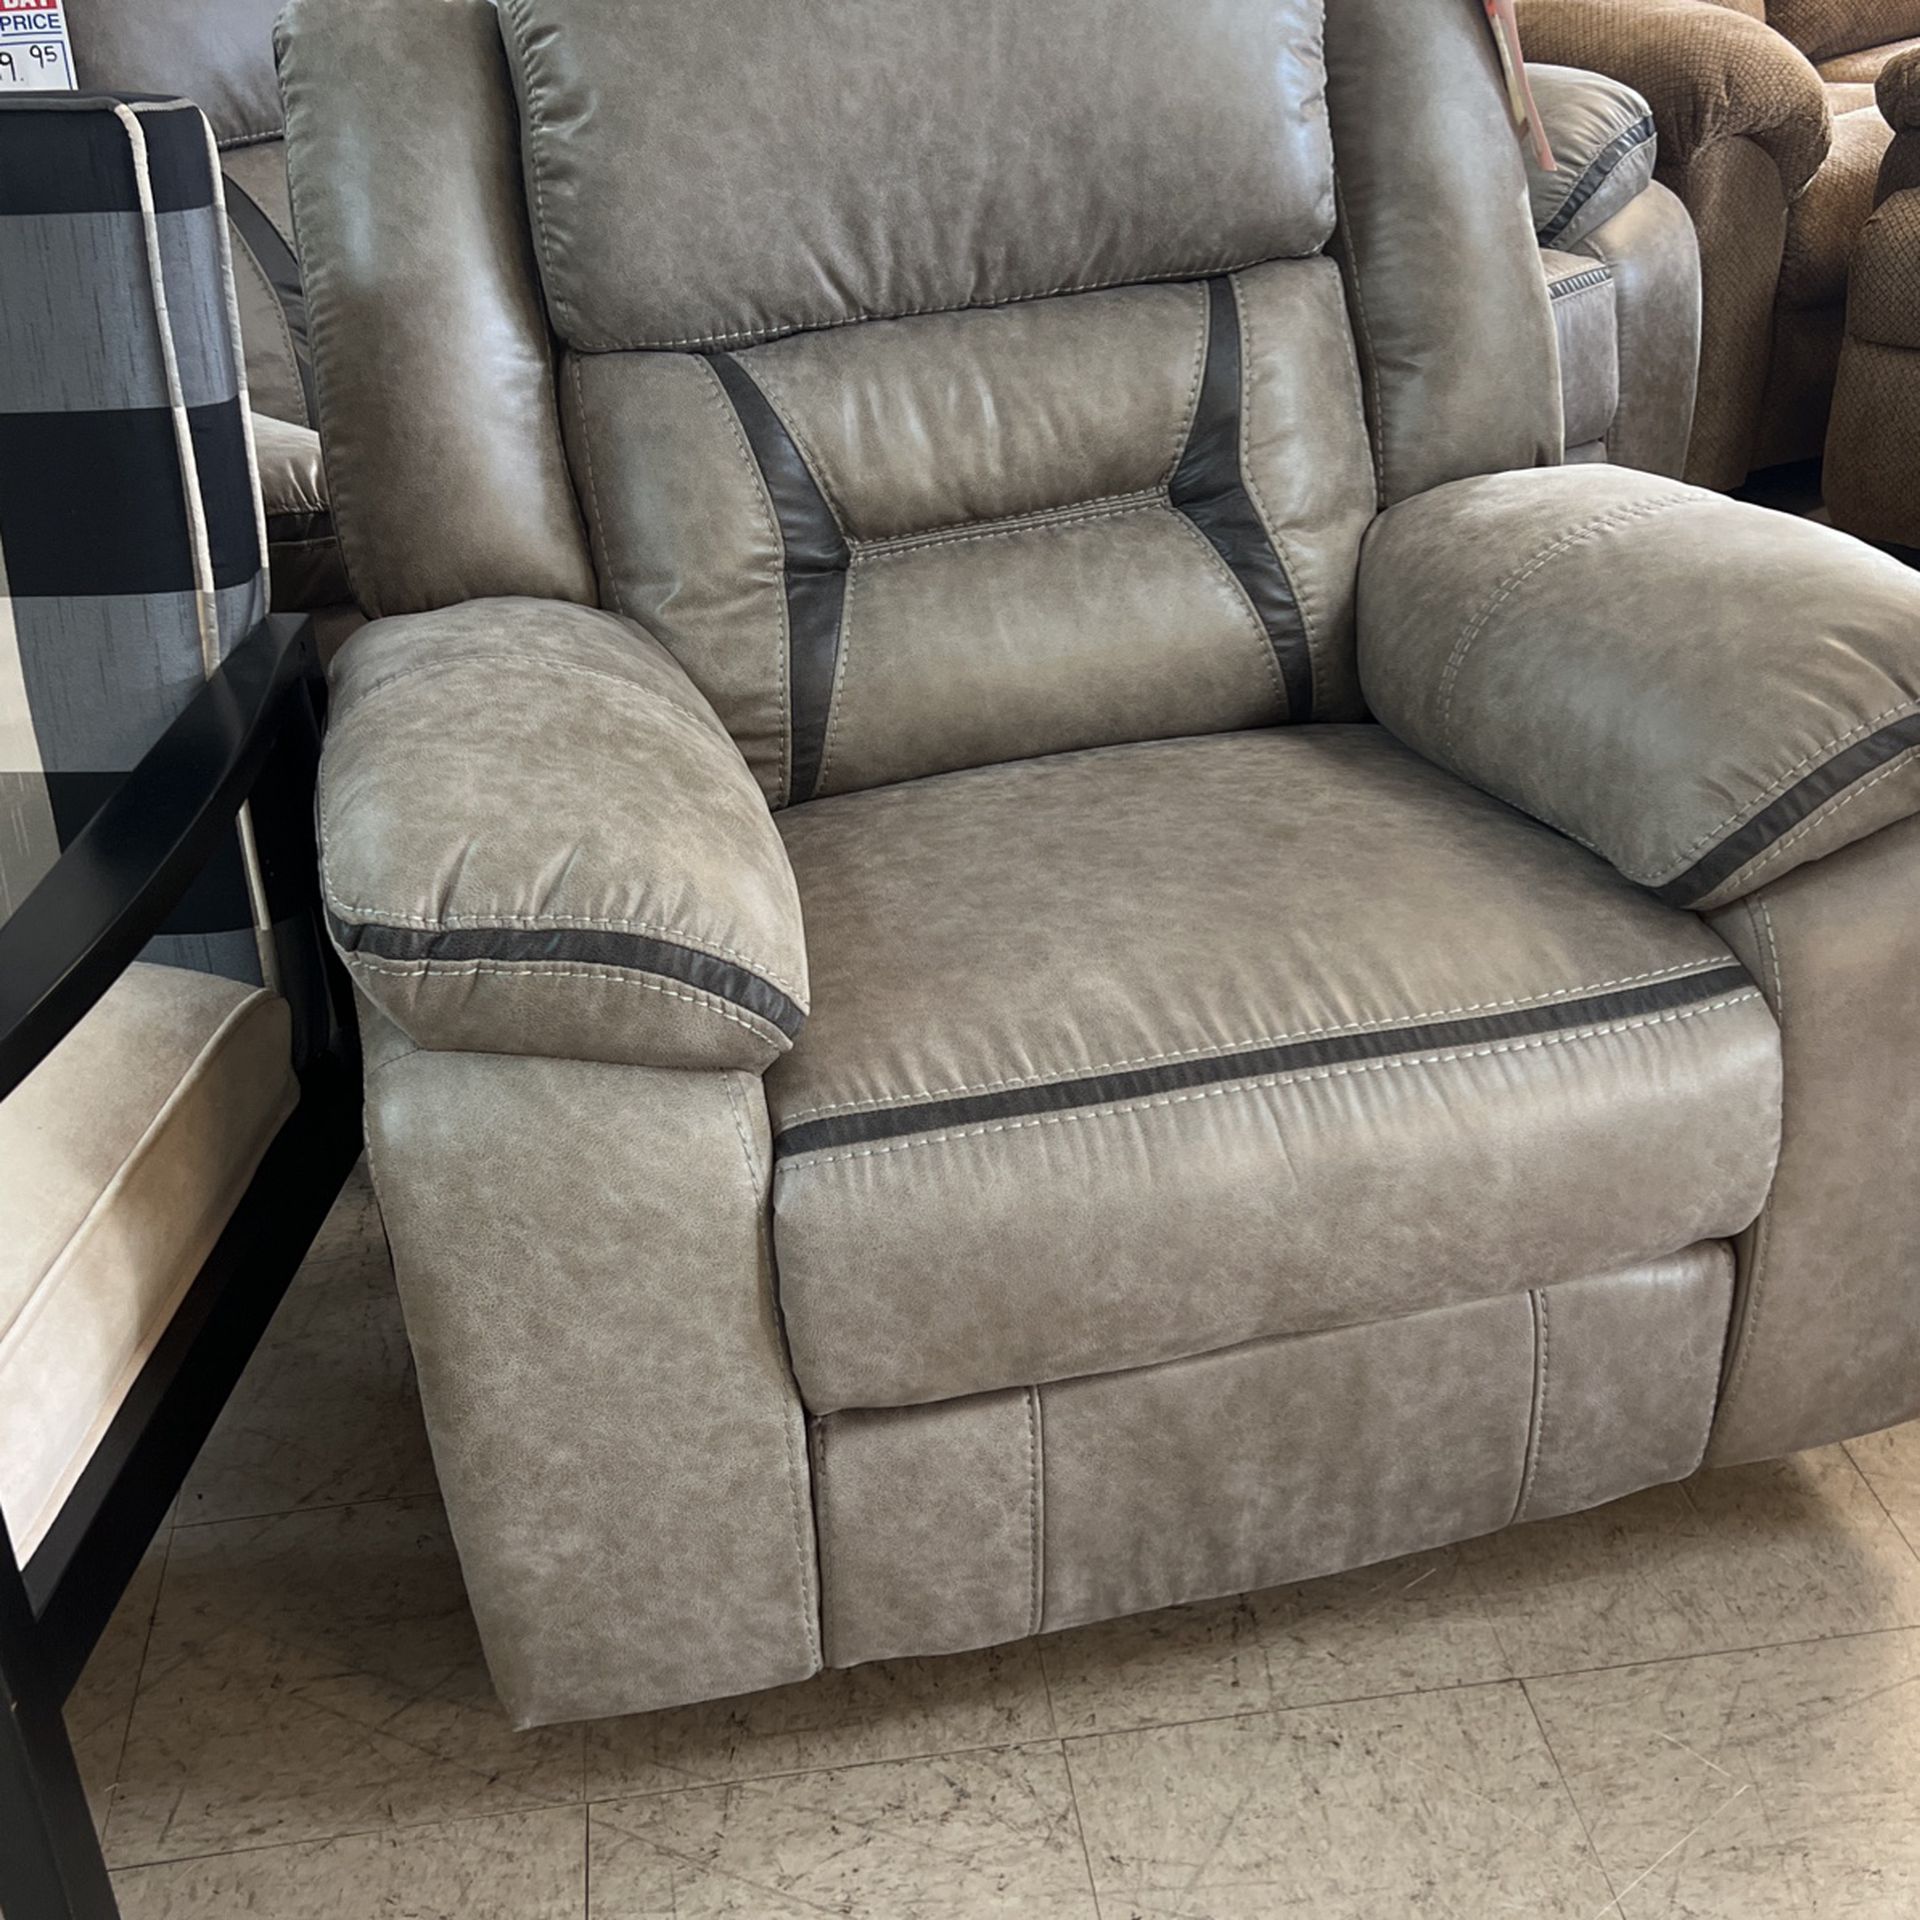 Recliners $600 down to $350